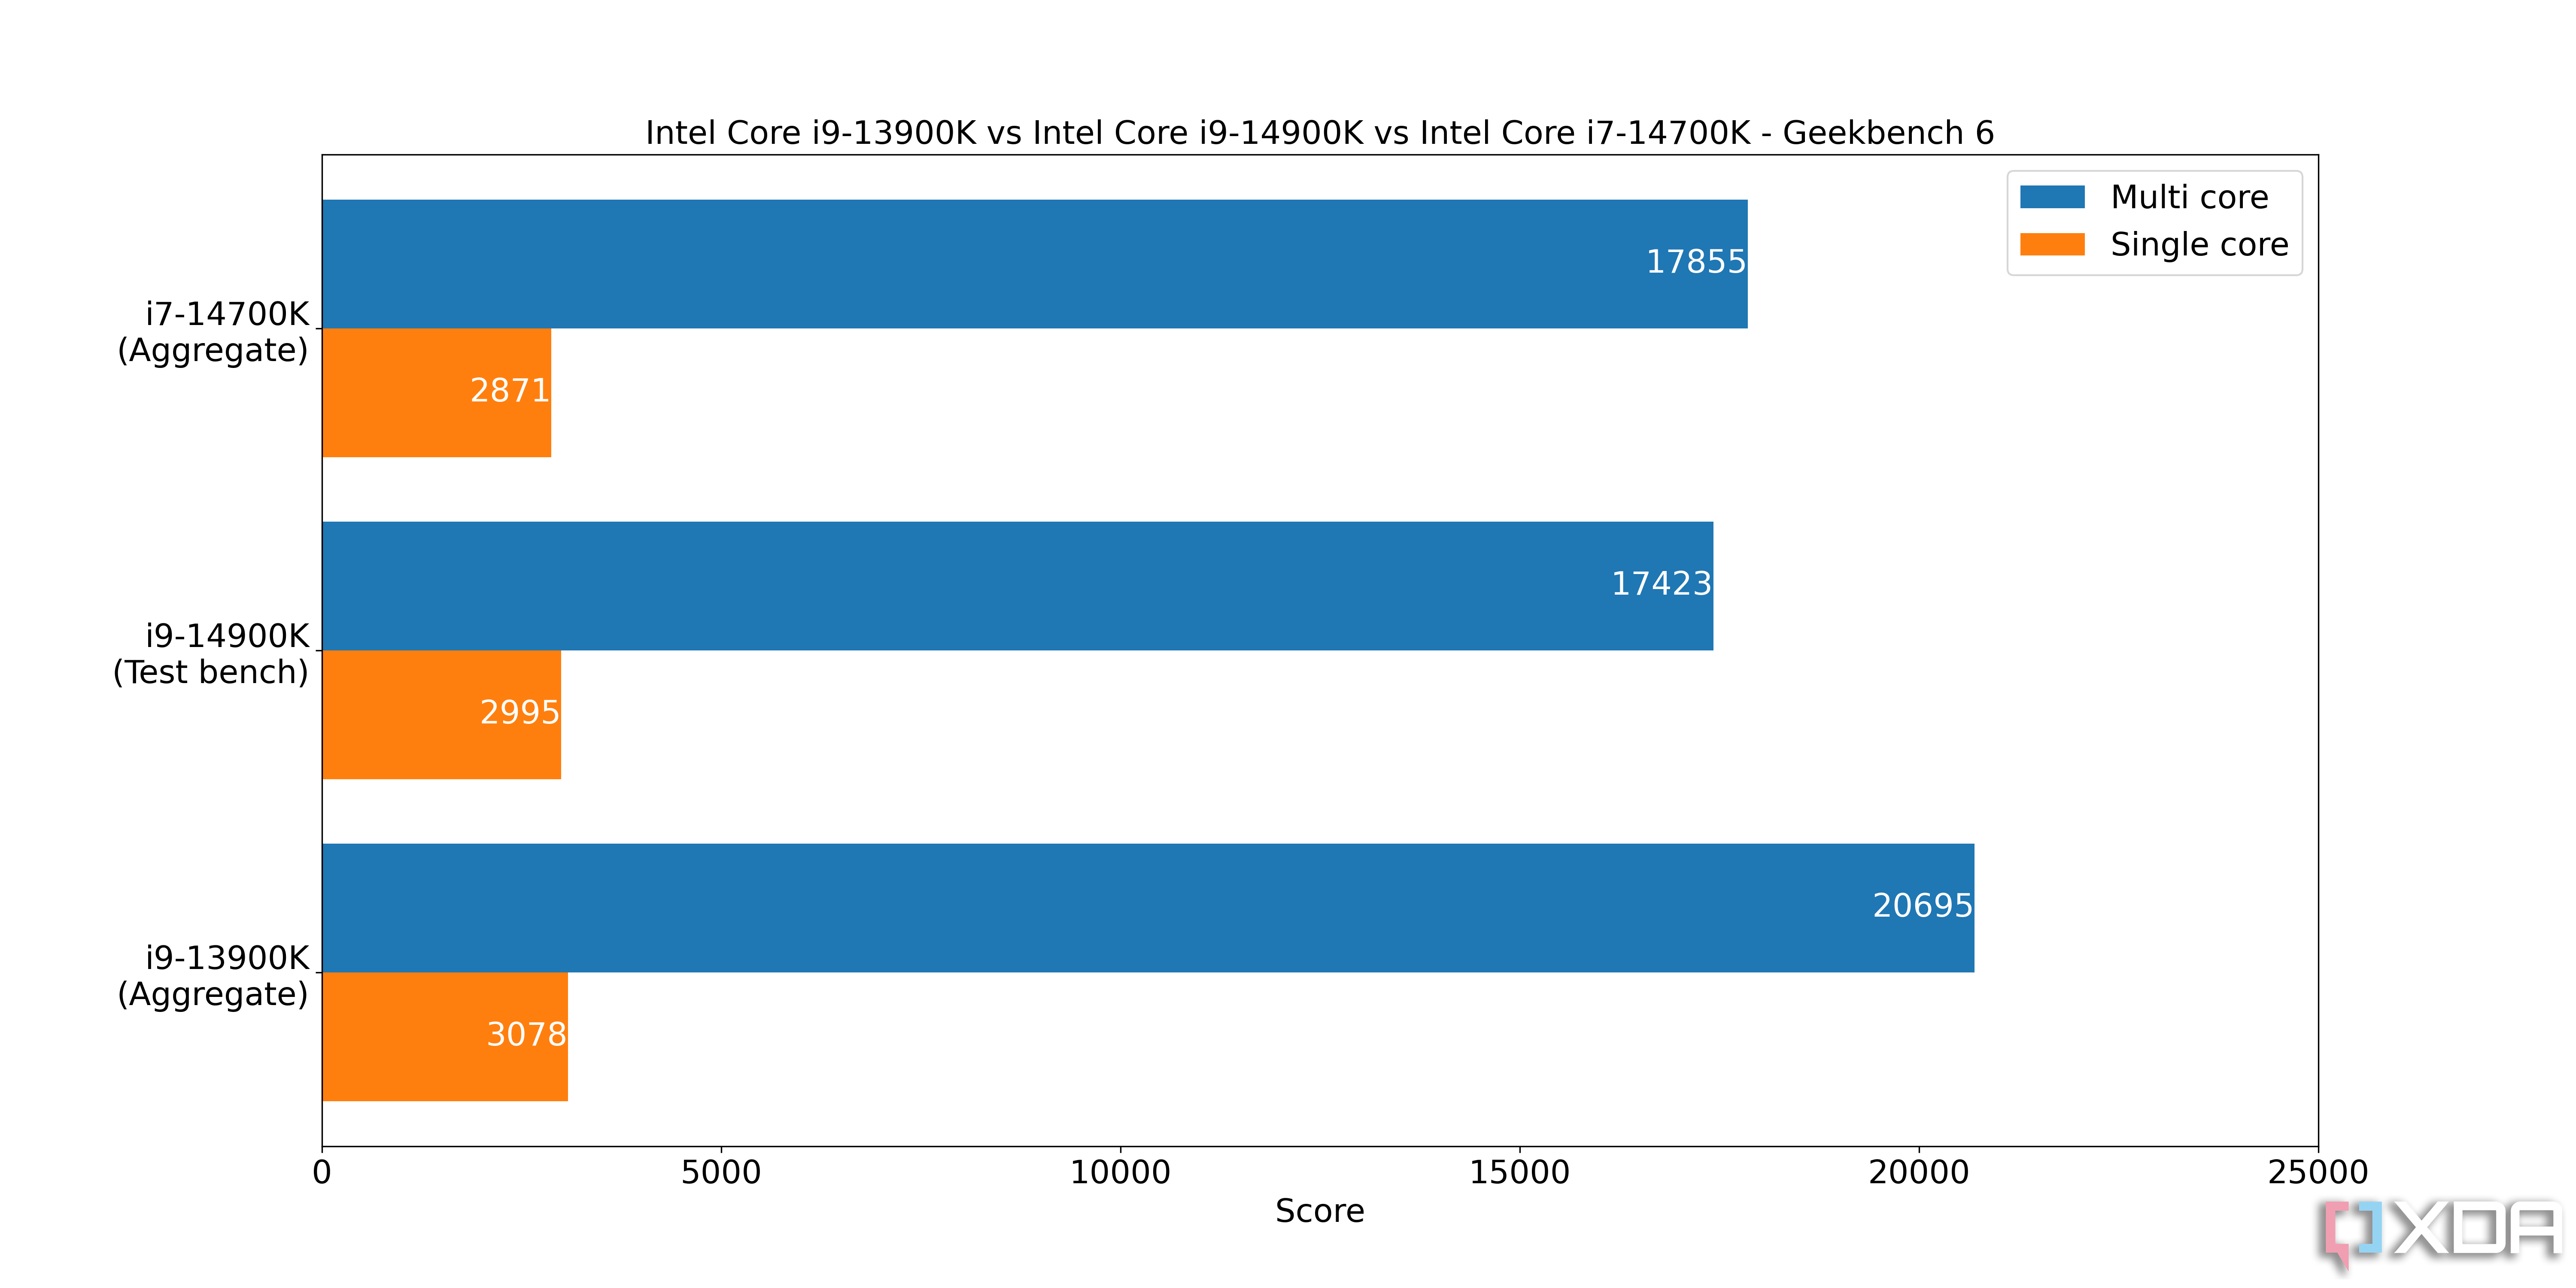 Intel Core i9 14900K stacked up against other Intel processors